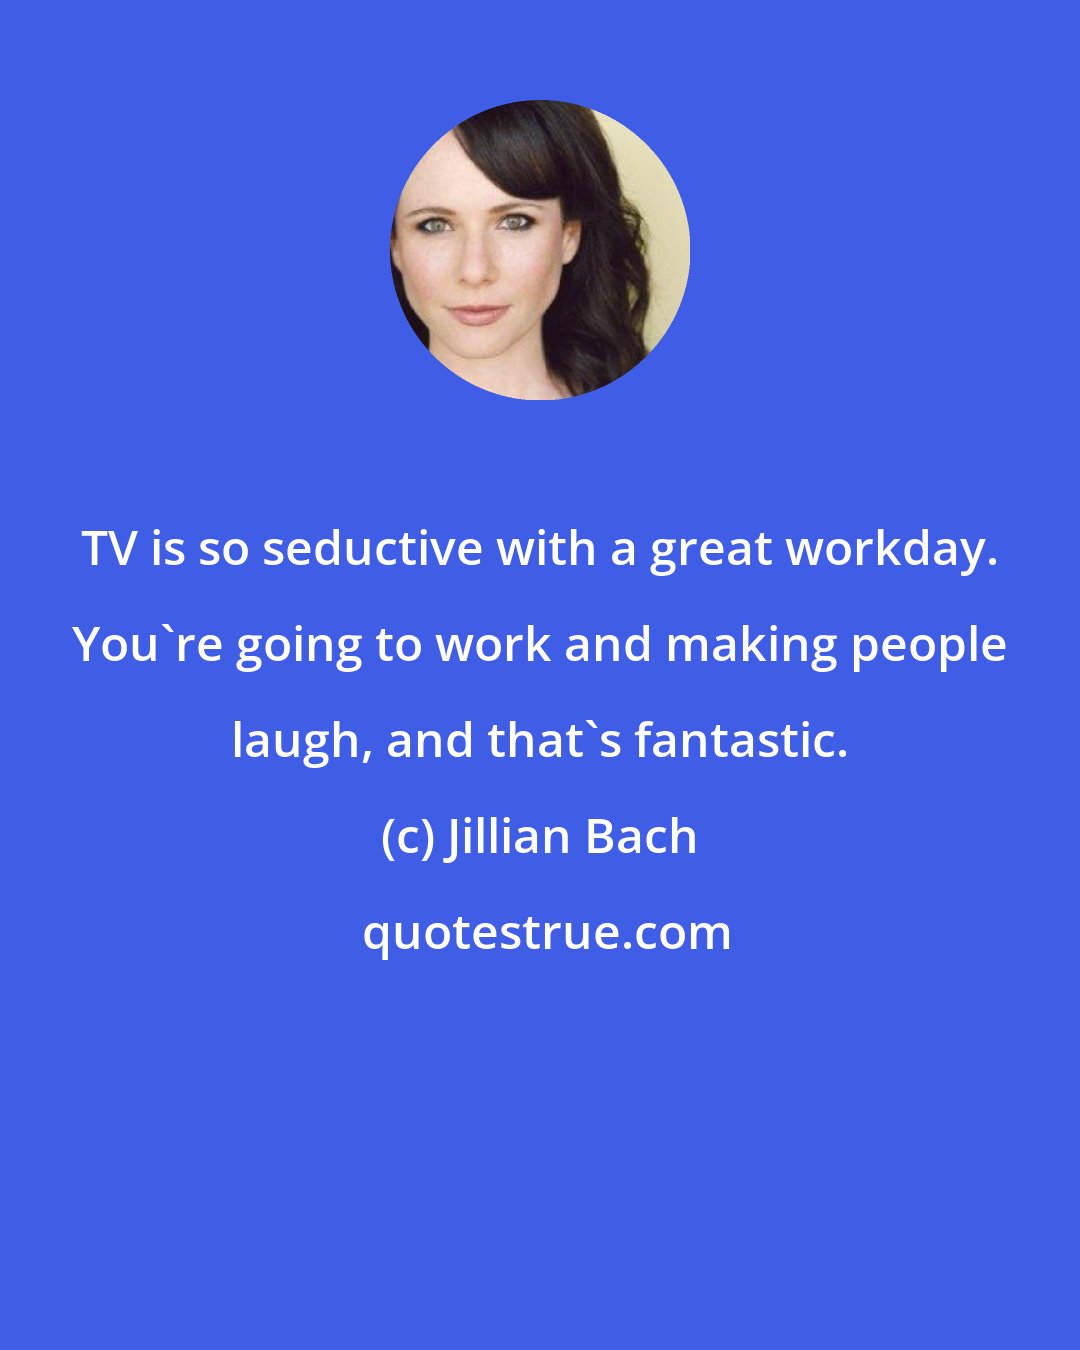 Jillian Bach: TV is so seductive with a great workday. You're going to work and making people laugh, and that's fantastic.